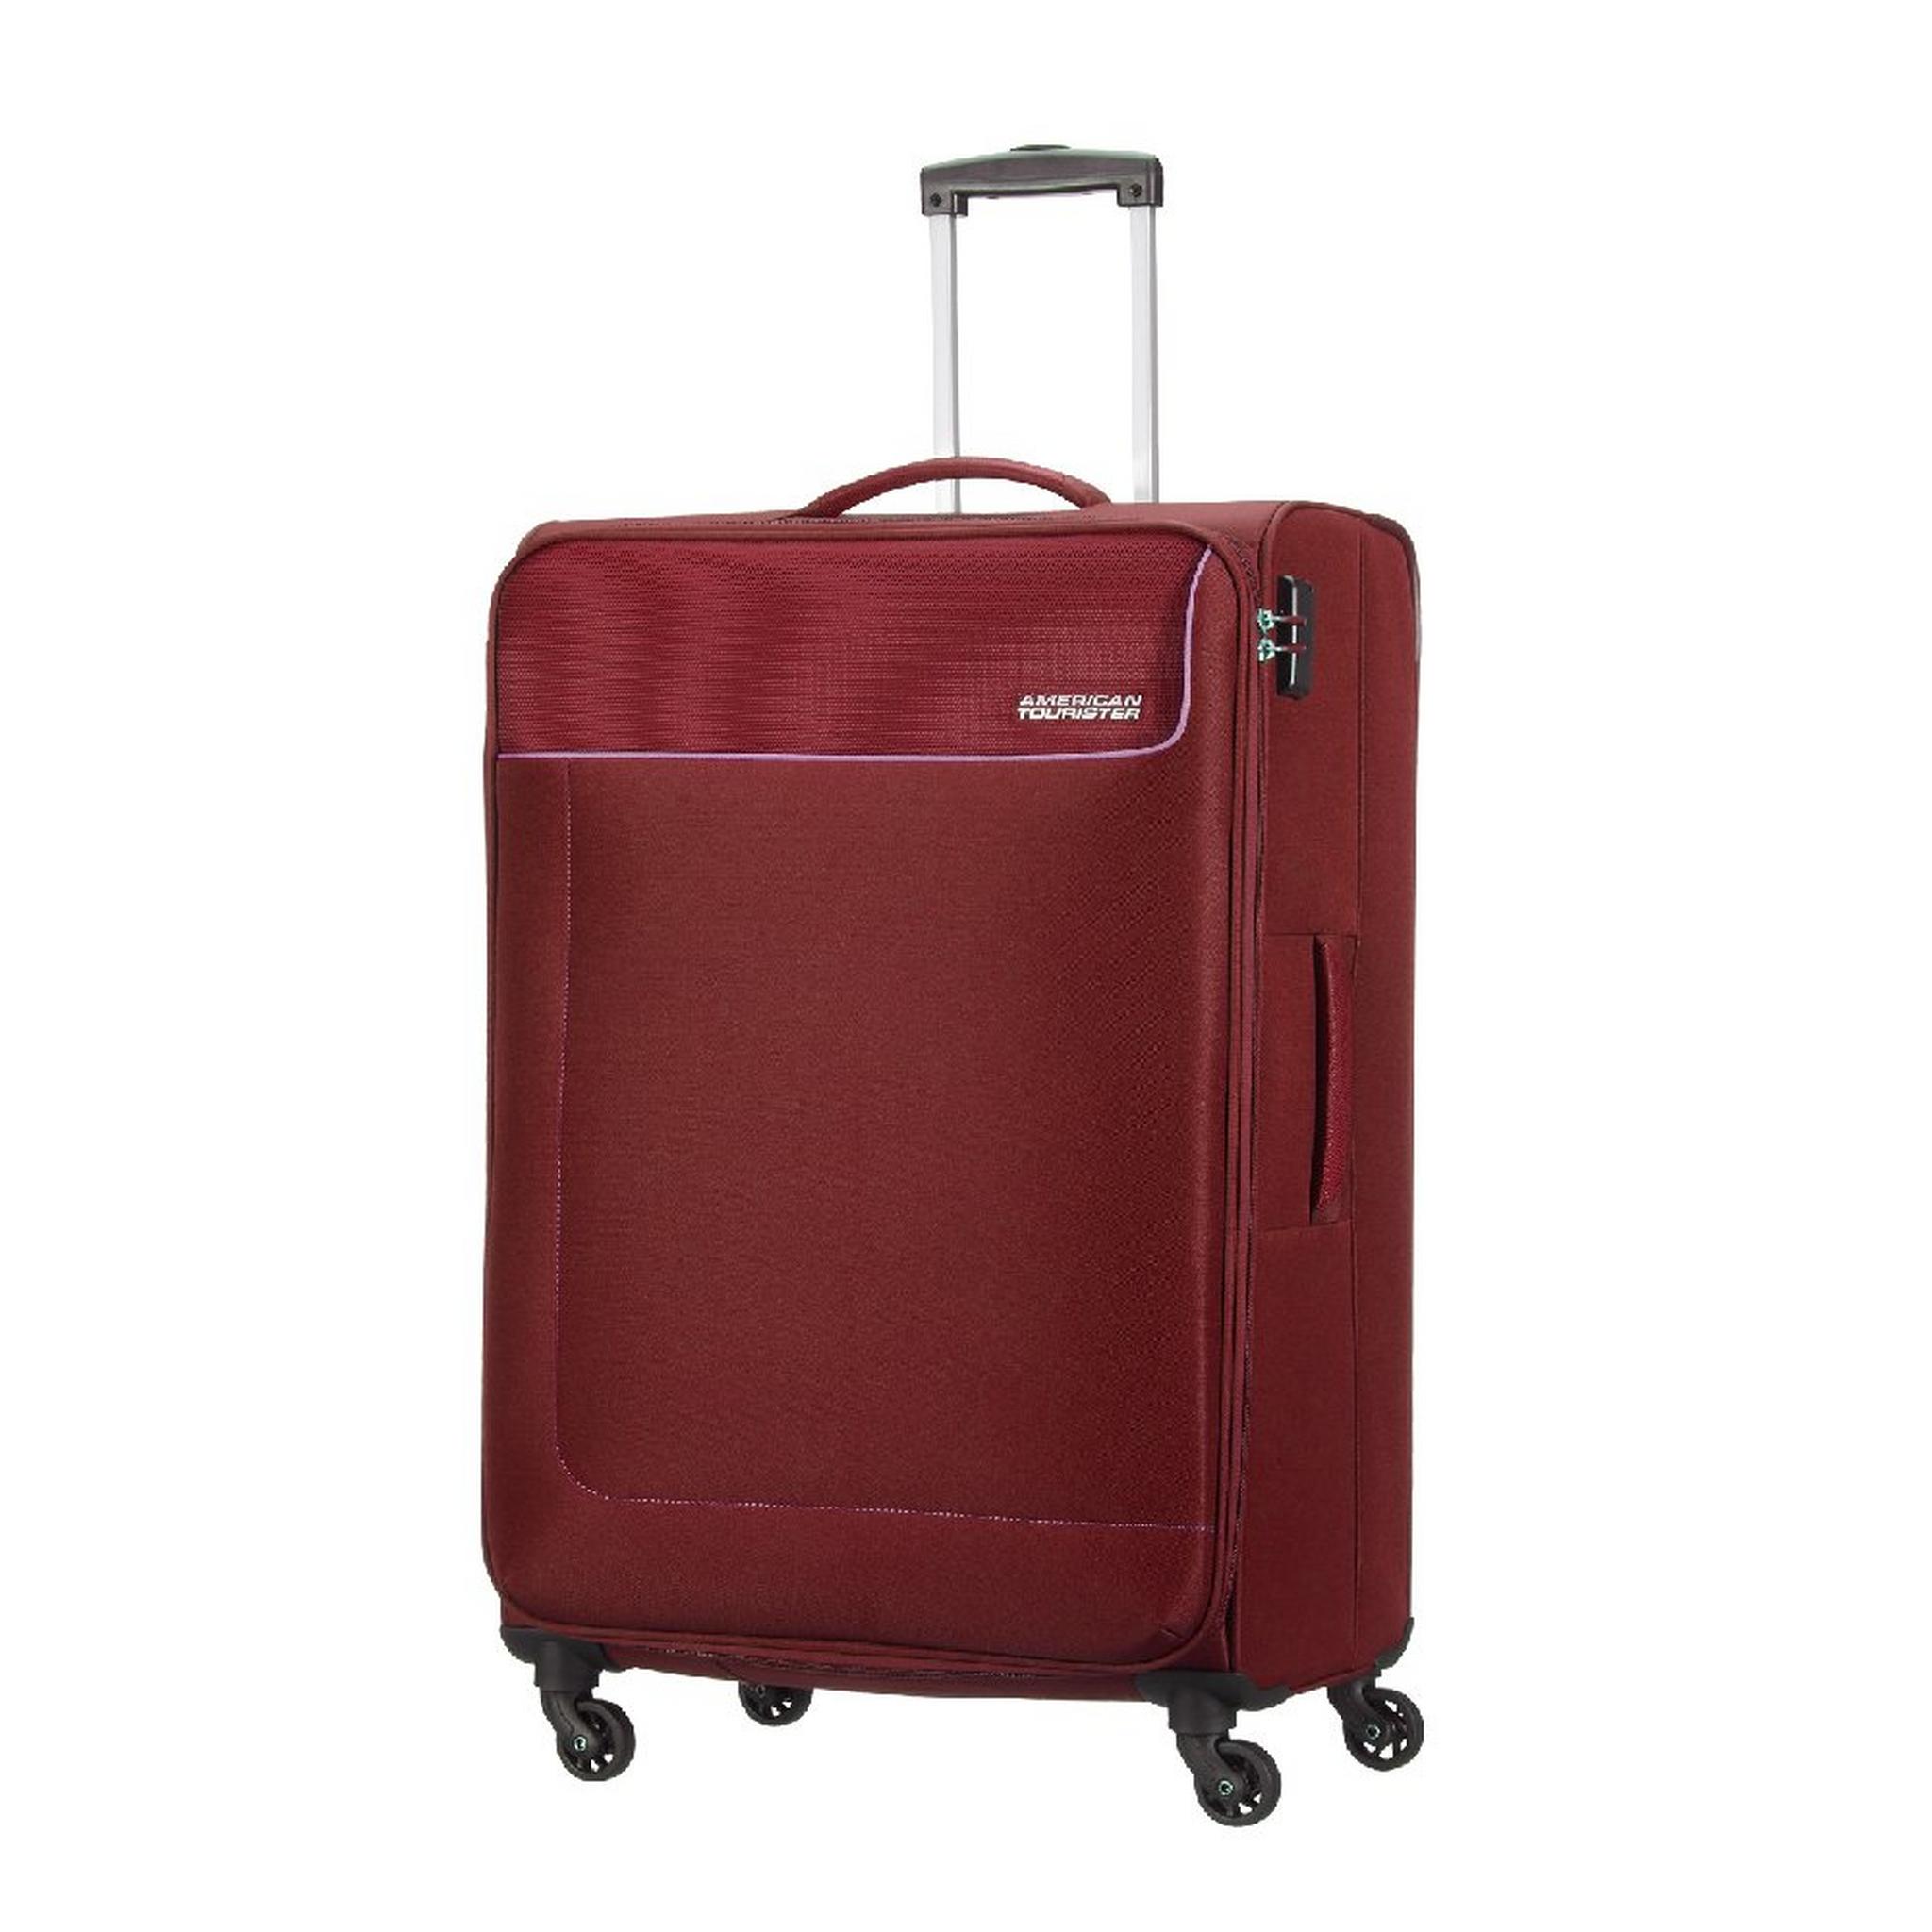 American Tourister Jamaica Spinner 69CM Soft Luggage, 27OX02002 - Maroon